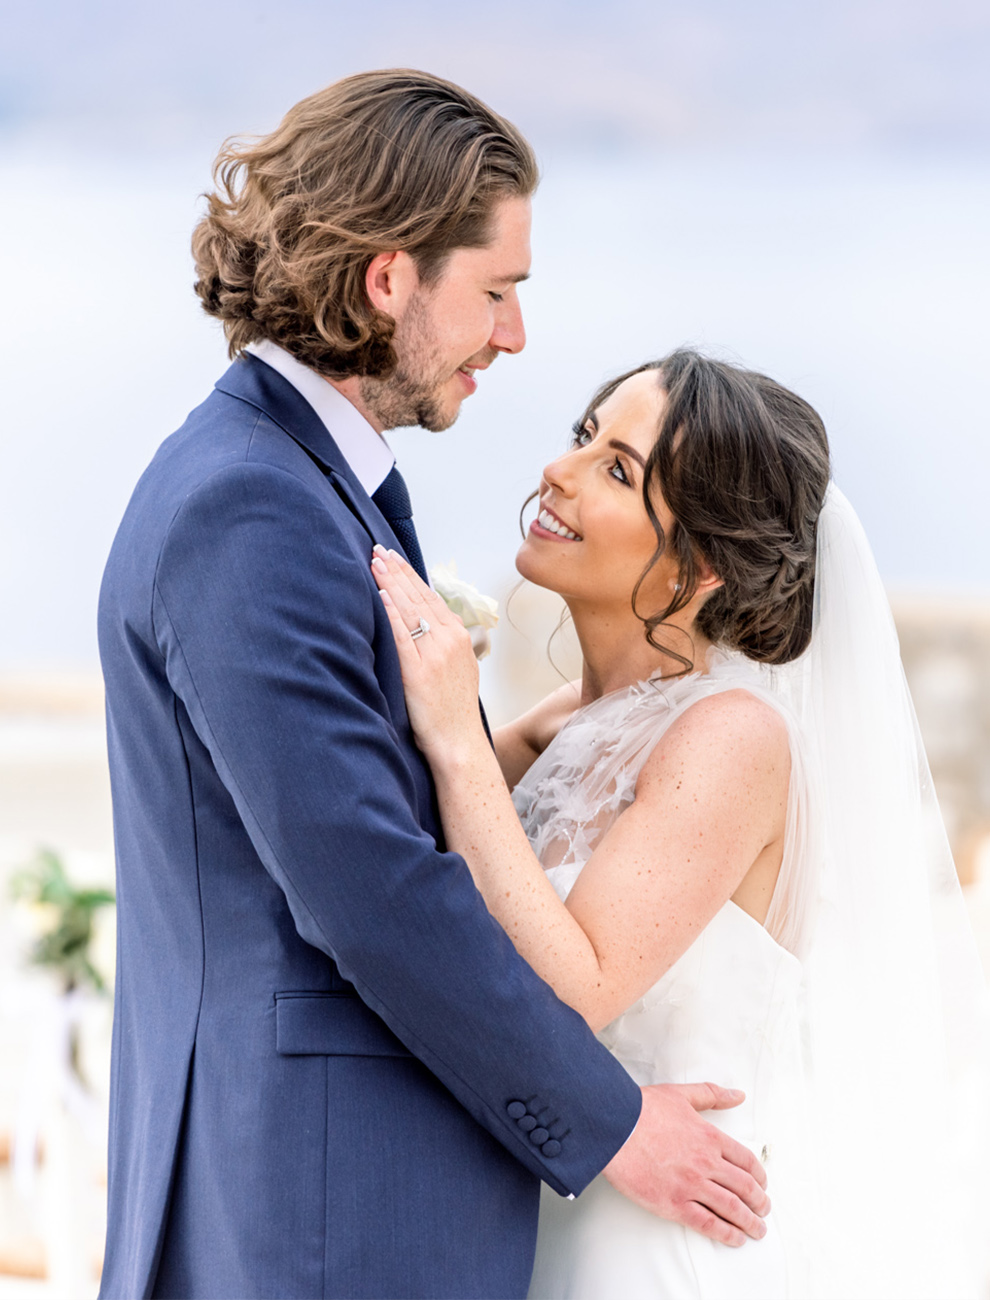 https://usercontent.one/wp/www.natalieandmax.co.uk/wp-content/uploads/2022/08/KTIMA-LINDOS-Wedding-Photographer-by-Natalie-and-Max-Photo-and-Films-Portfolio.jpg?media=1654418125